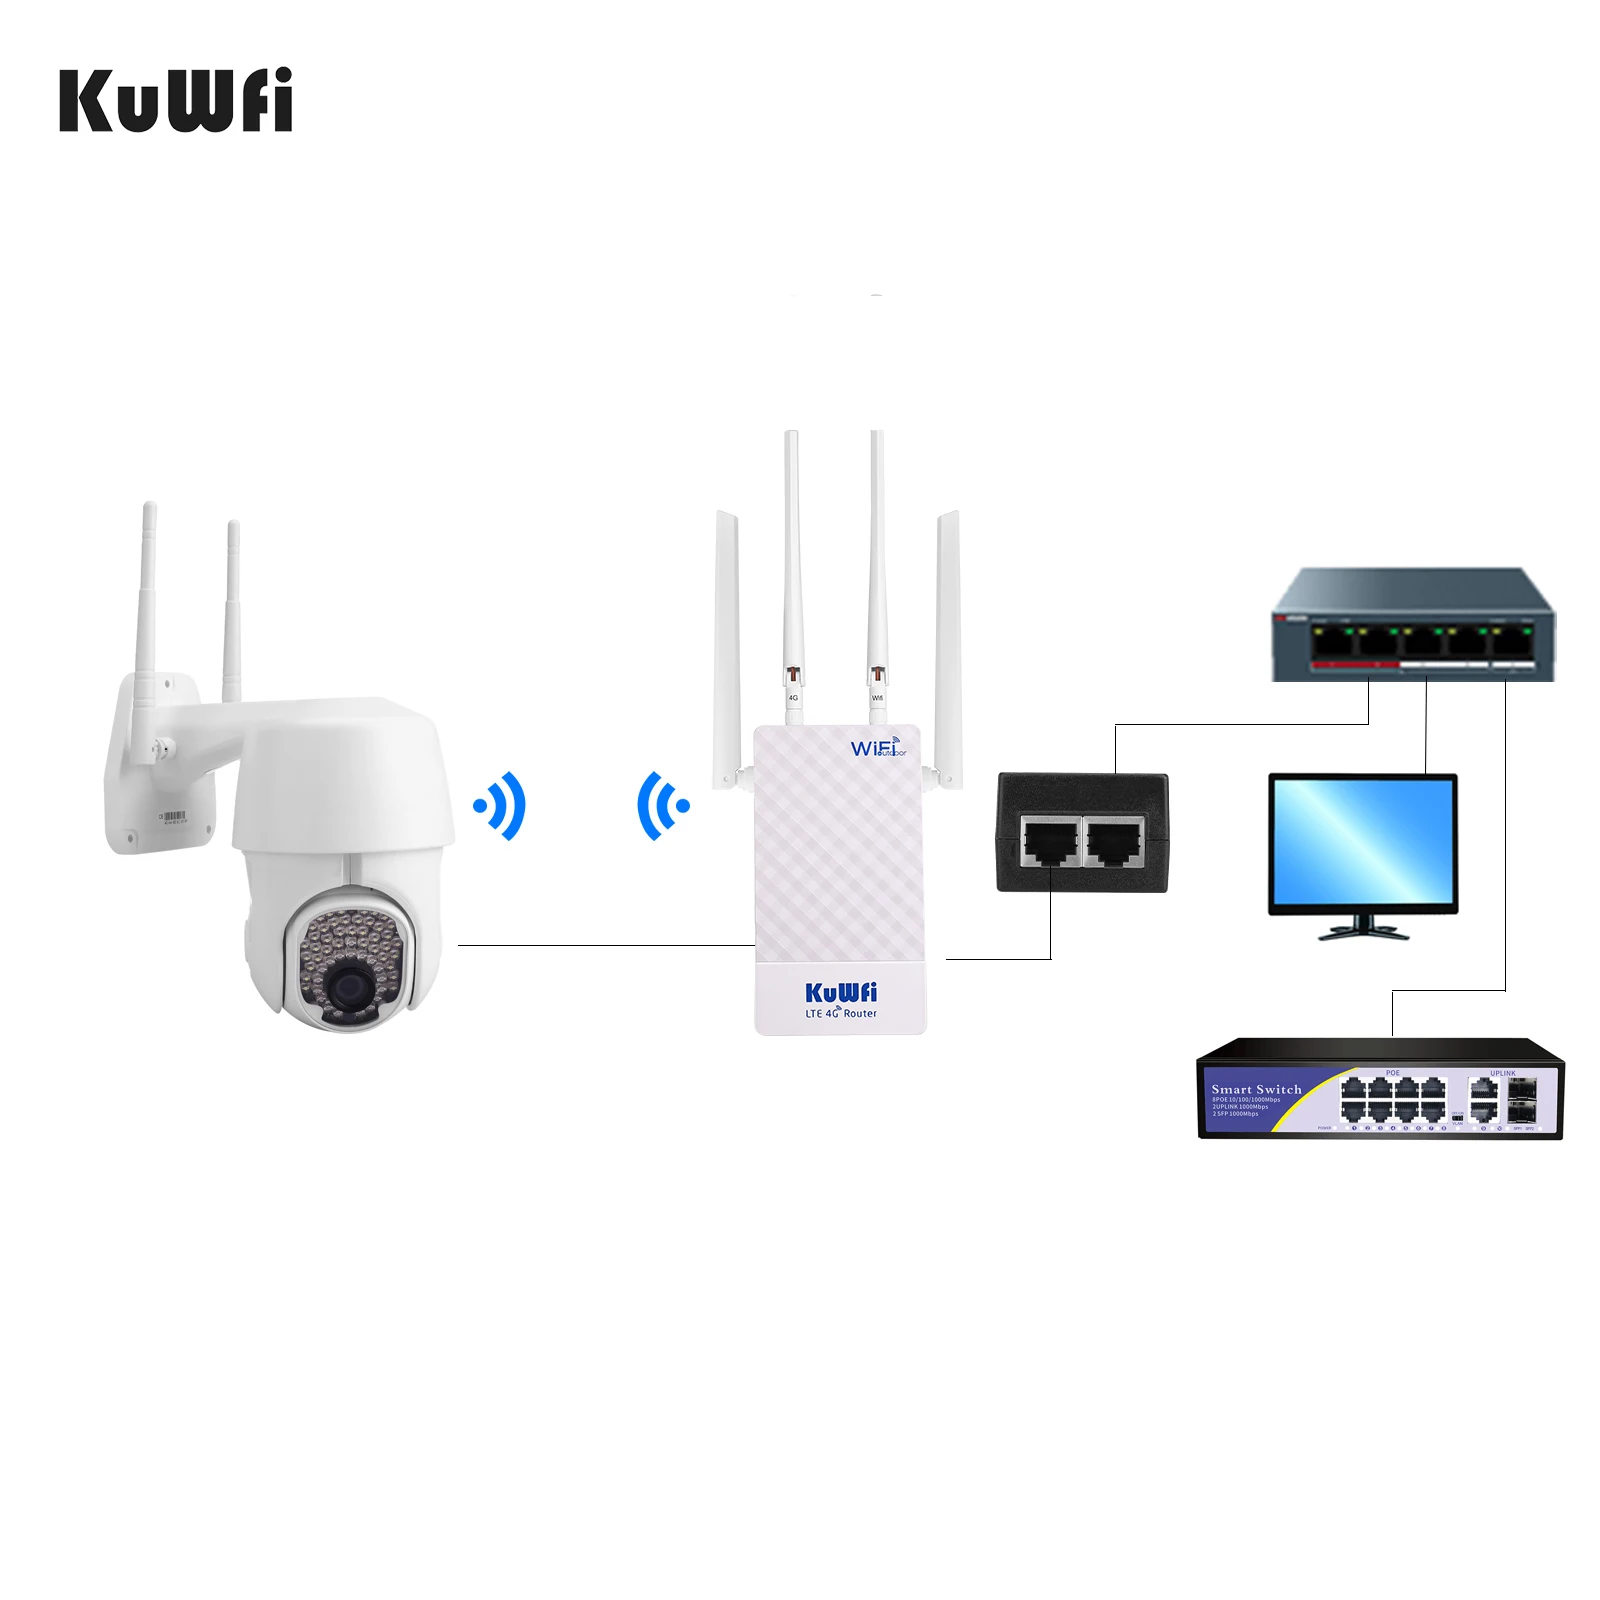 kuwfi lte 4g router outdoor 150mbps wifi router with sim card support port filtering mac ip settings port mapping dmz settings free global shipping